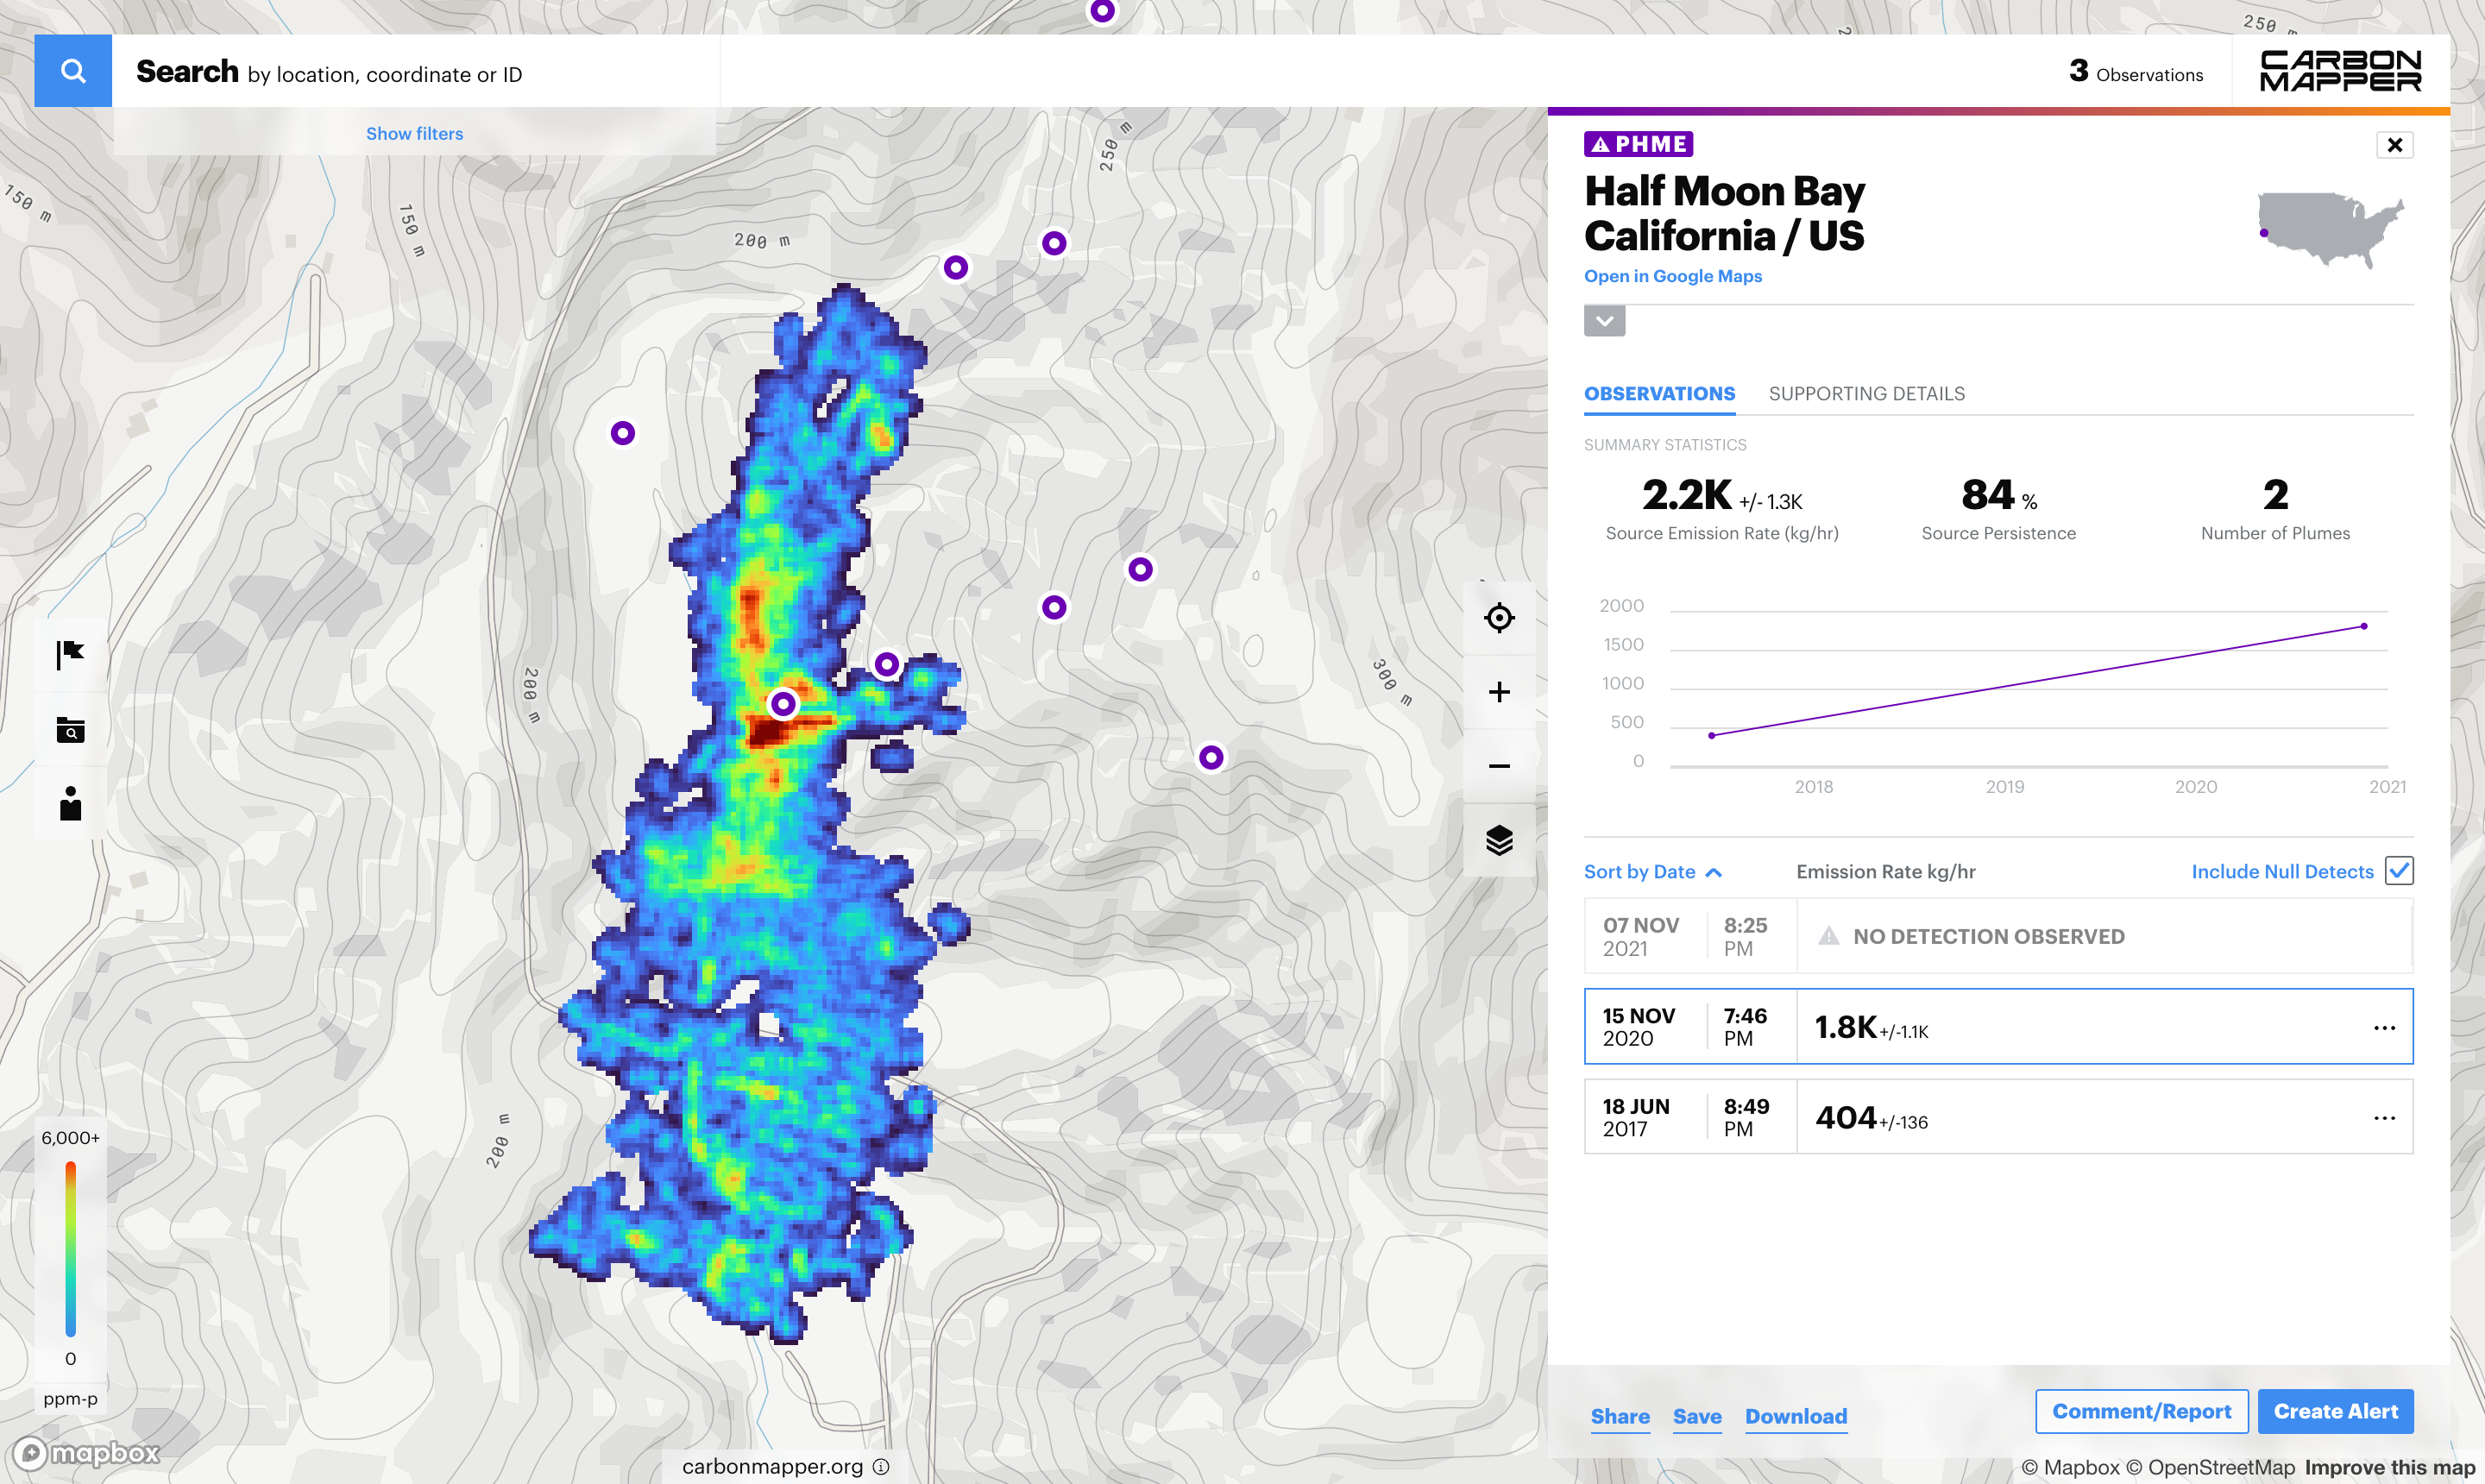 Image of Carbon Mapper's data portal showing a methane plume